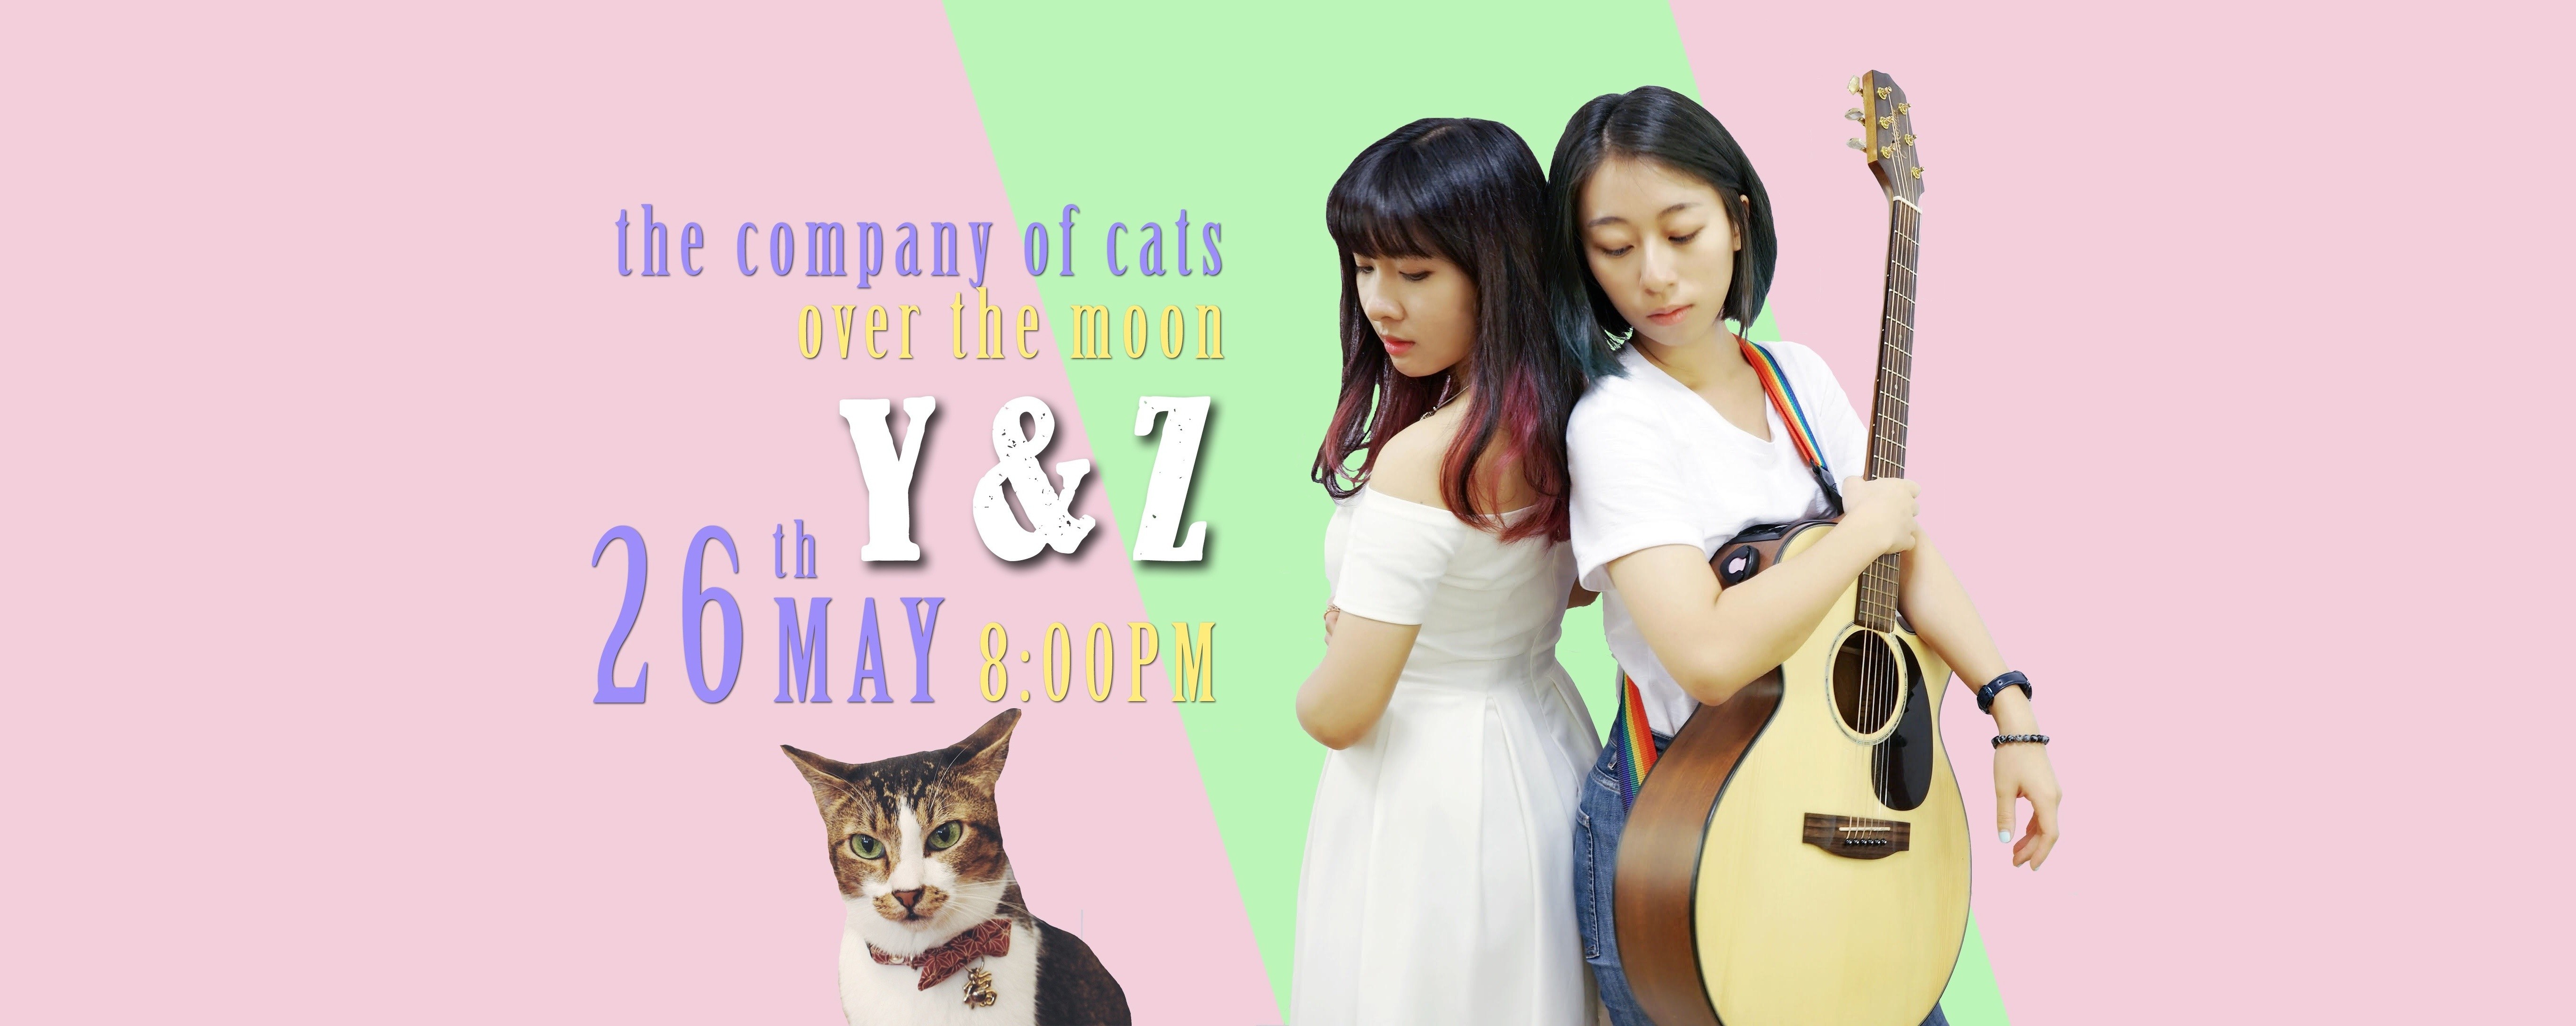 Bi-monthly Mewsic Series - Y & Z at The Company of Cats